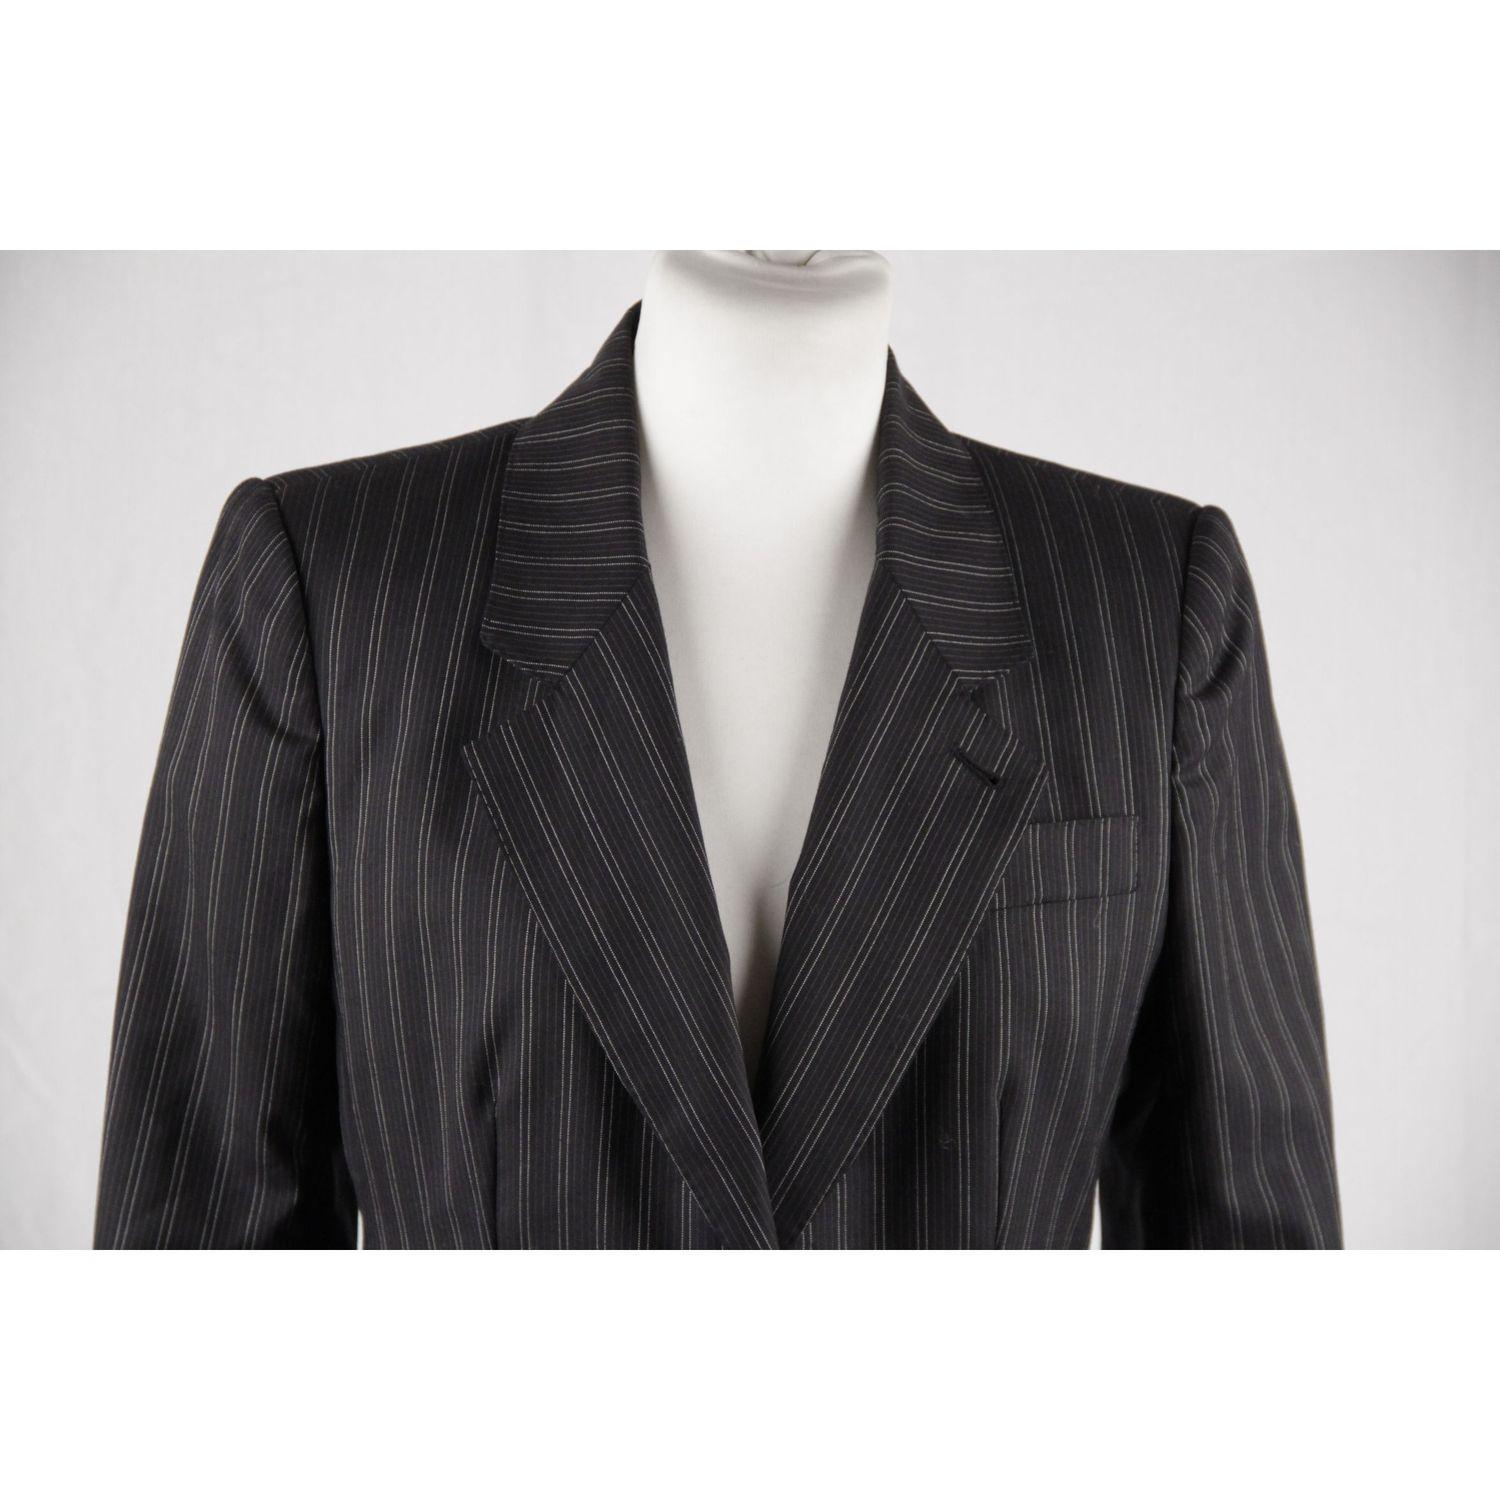 Yves Saint Laurent Rive Gauche Black Pinstriped Blazer Jacket Size 38

MATERIAL: Wool 
COLOR: Black 
MODEL: Blazer 
GENDER: Women 
SIZE: Small 
COUNTRY OF MANUFACTURE: Italy 

Condition CONDITION DETAILS: B :GOOD CONDITION - Some light wear of use -